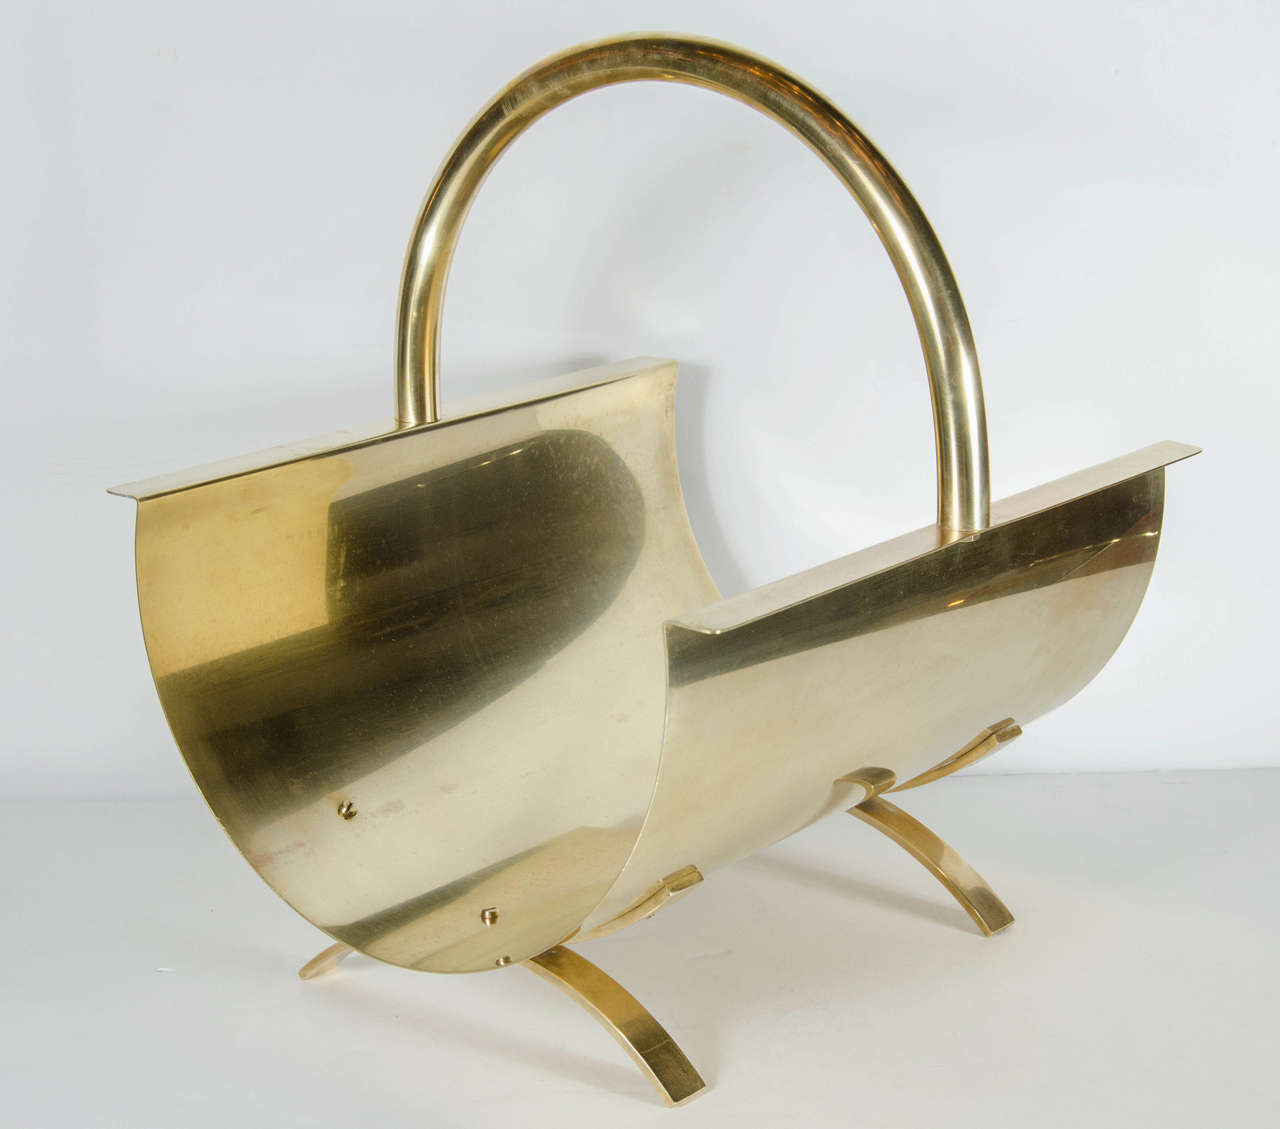 This outstanding Mid-Century Modernist log holder features a strong crisp geometric design made entirely of brass. This stunning piece can also be used as a magazine stand and is in excellent condition.